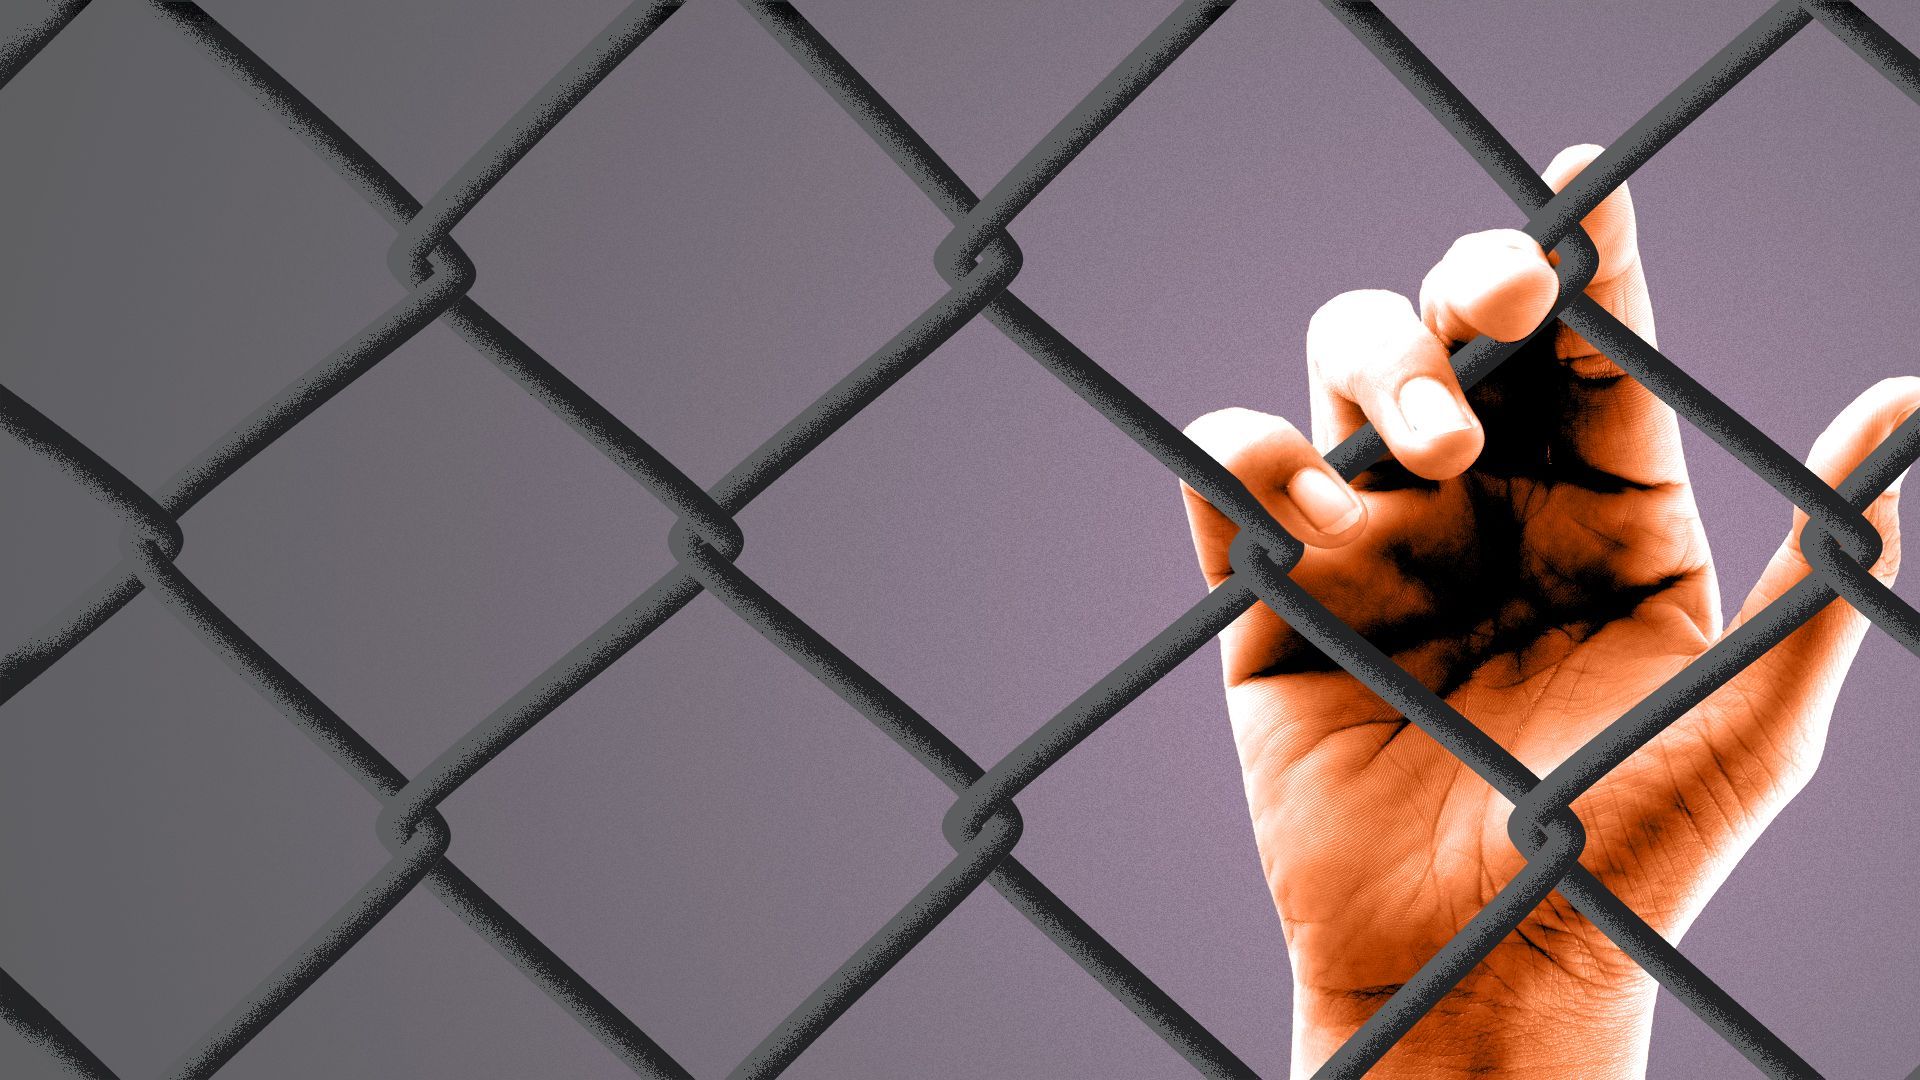 Illustration of a hand resting on a jail fence.